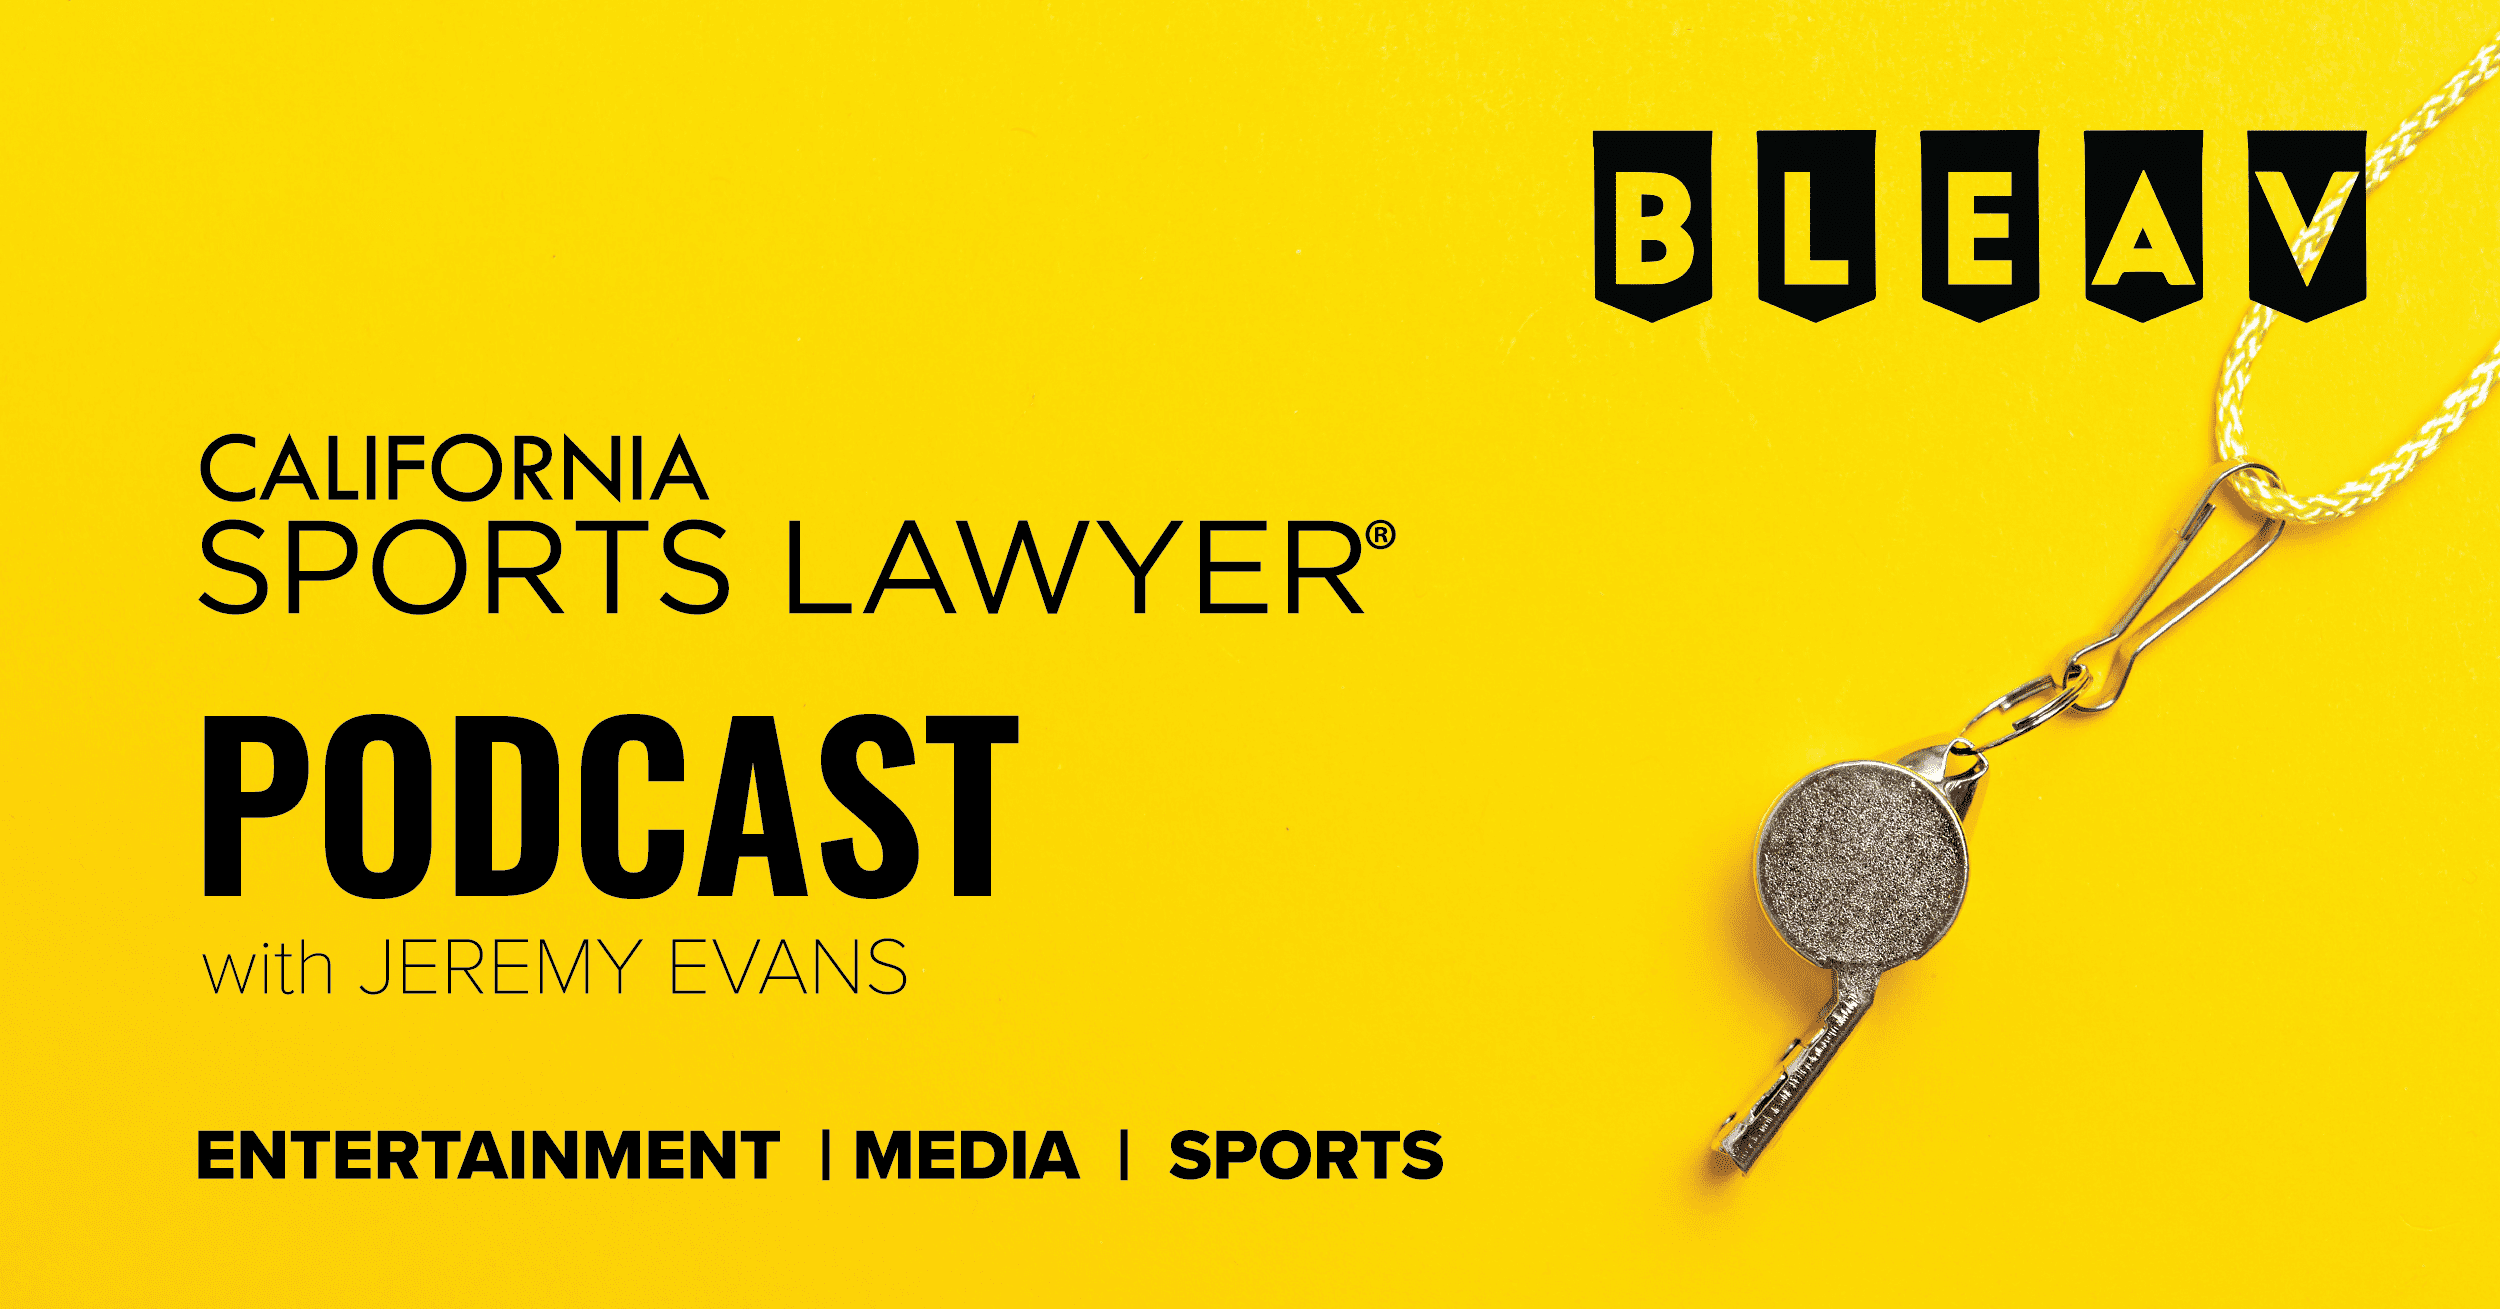 California Sports Lawyer® Podcast with Jeremy Evans: Interesting Uses of Artificial Intelligence in Business